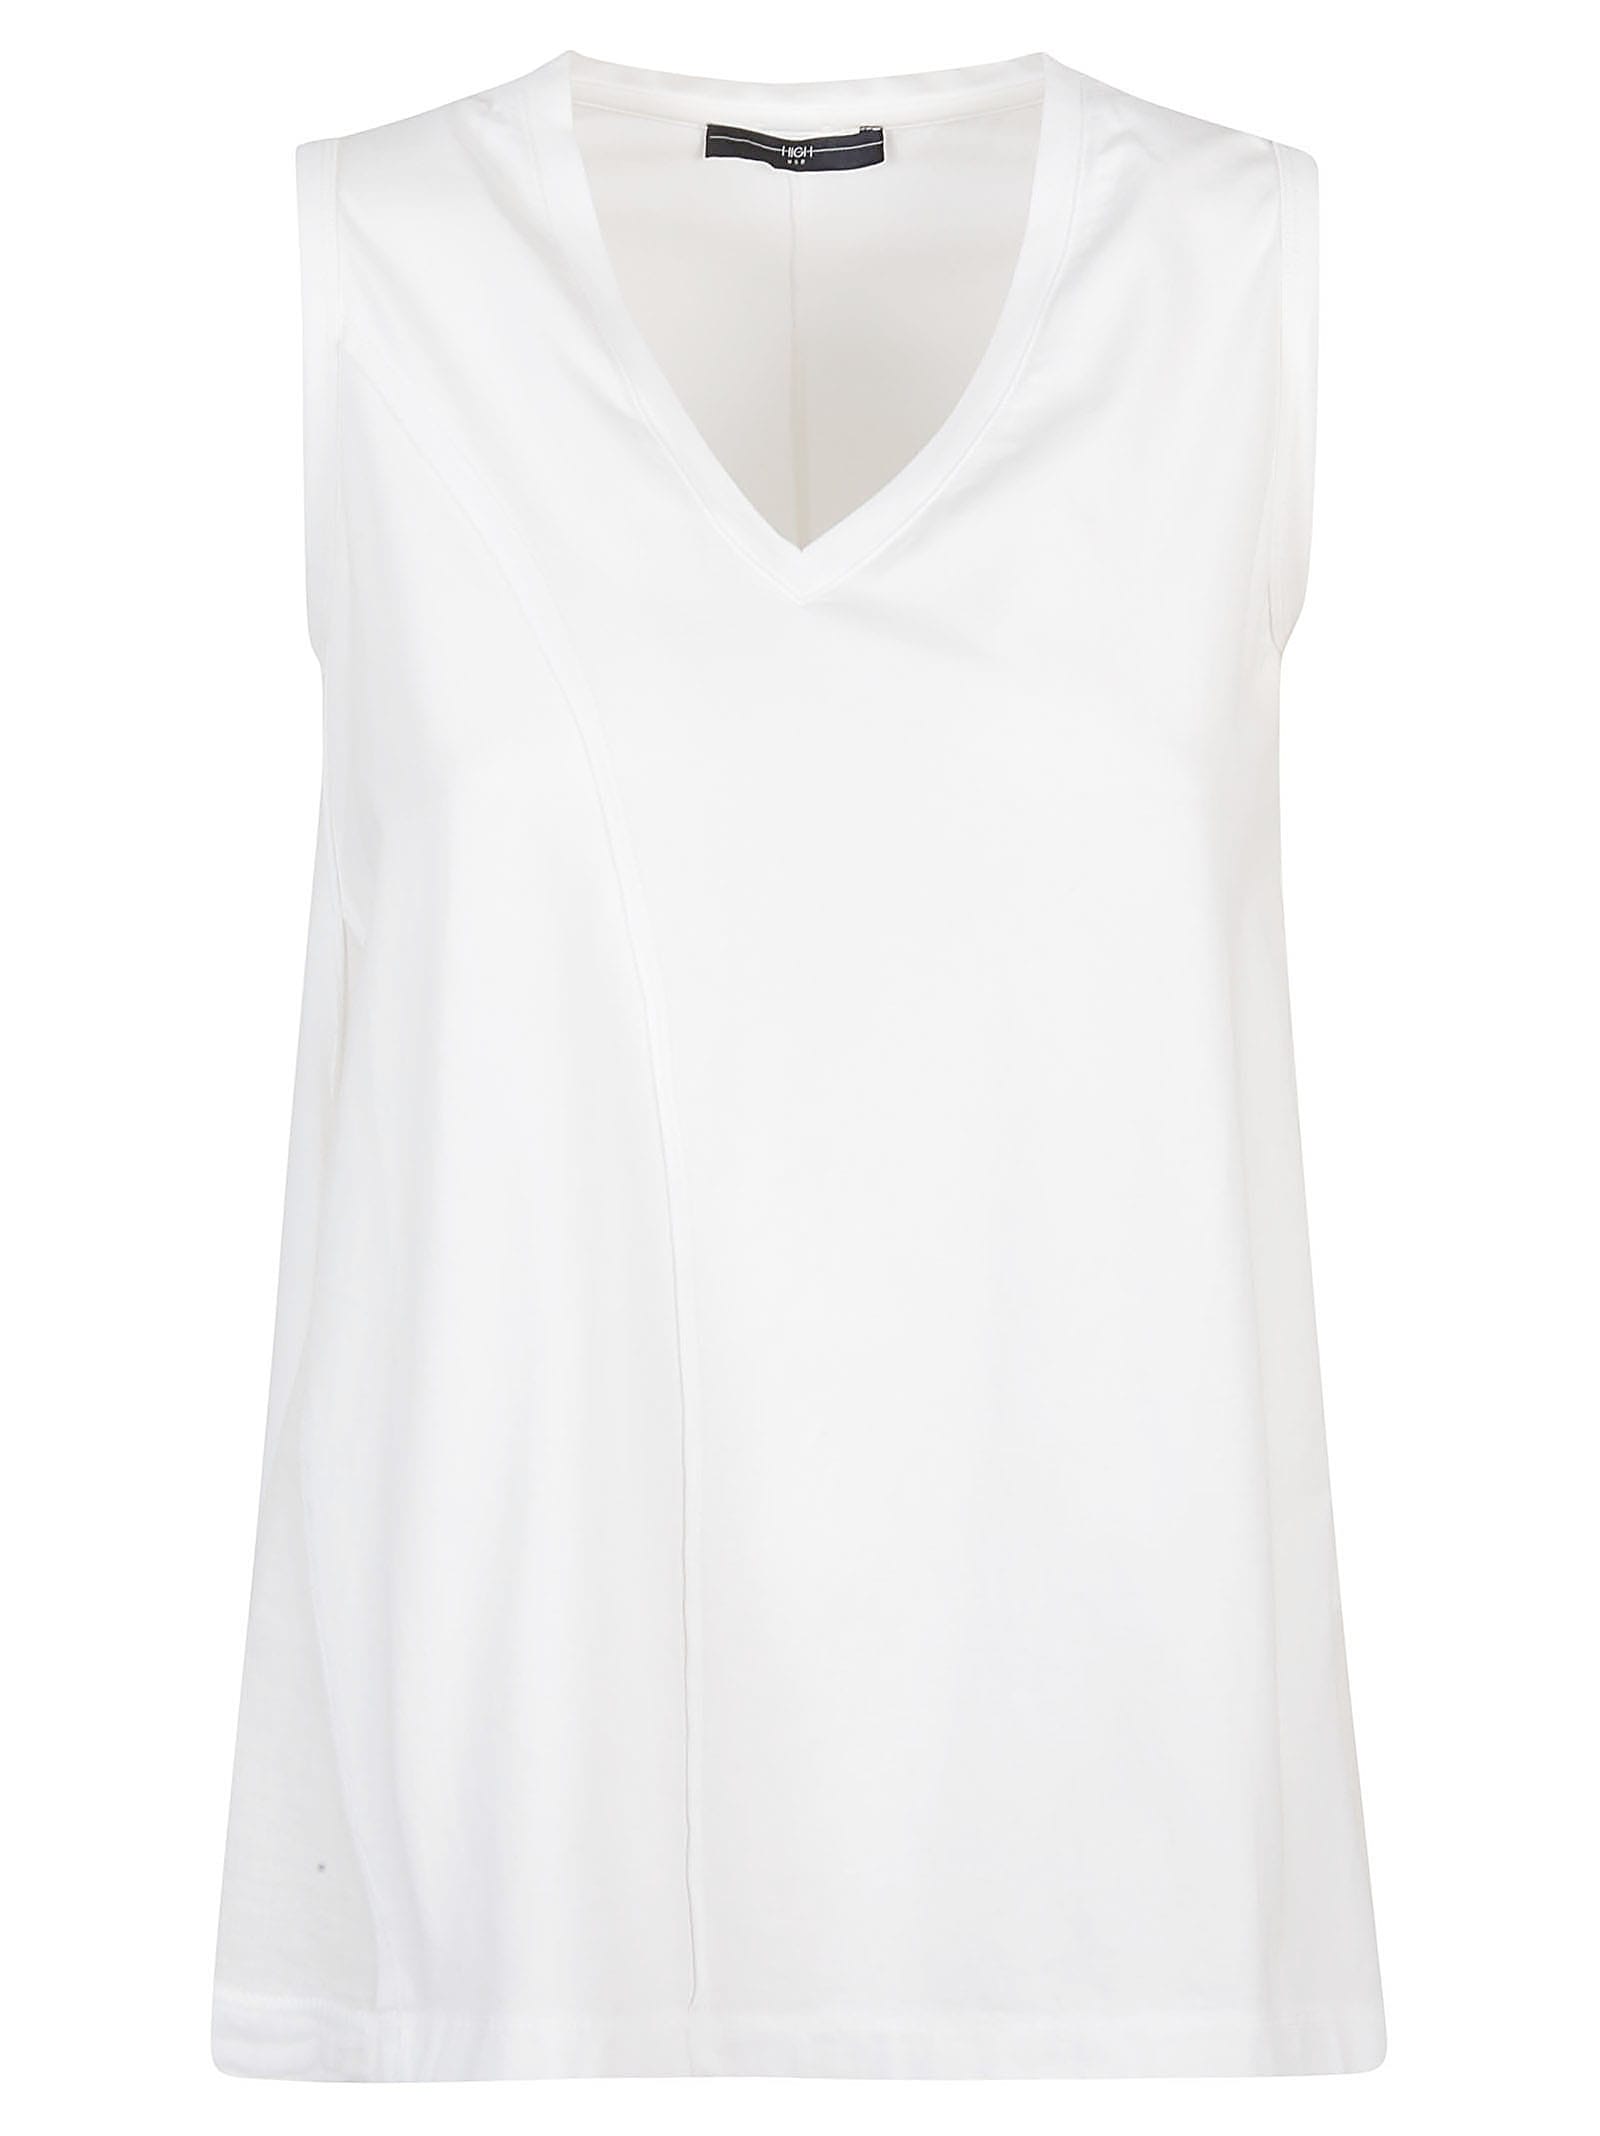 Shop High Cryptic Top In White